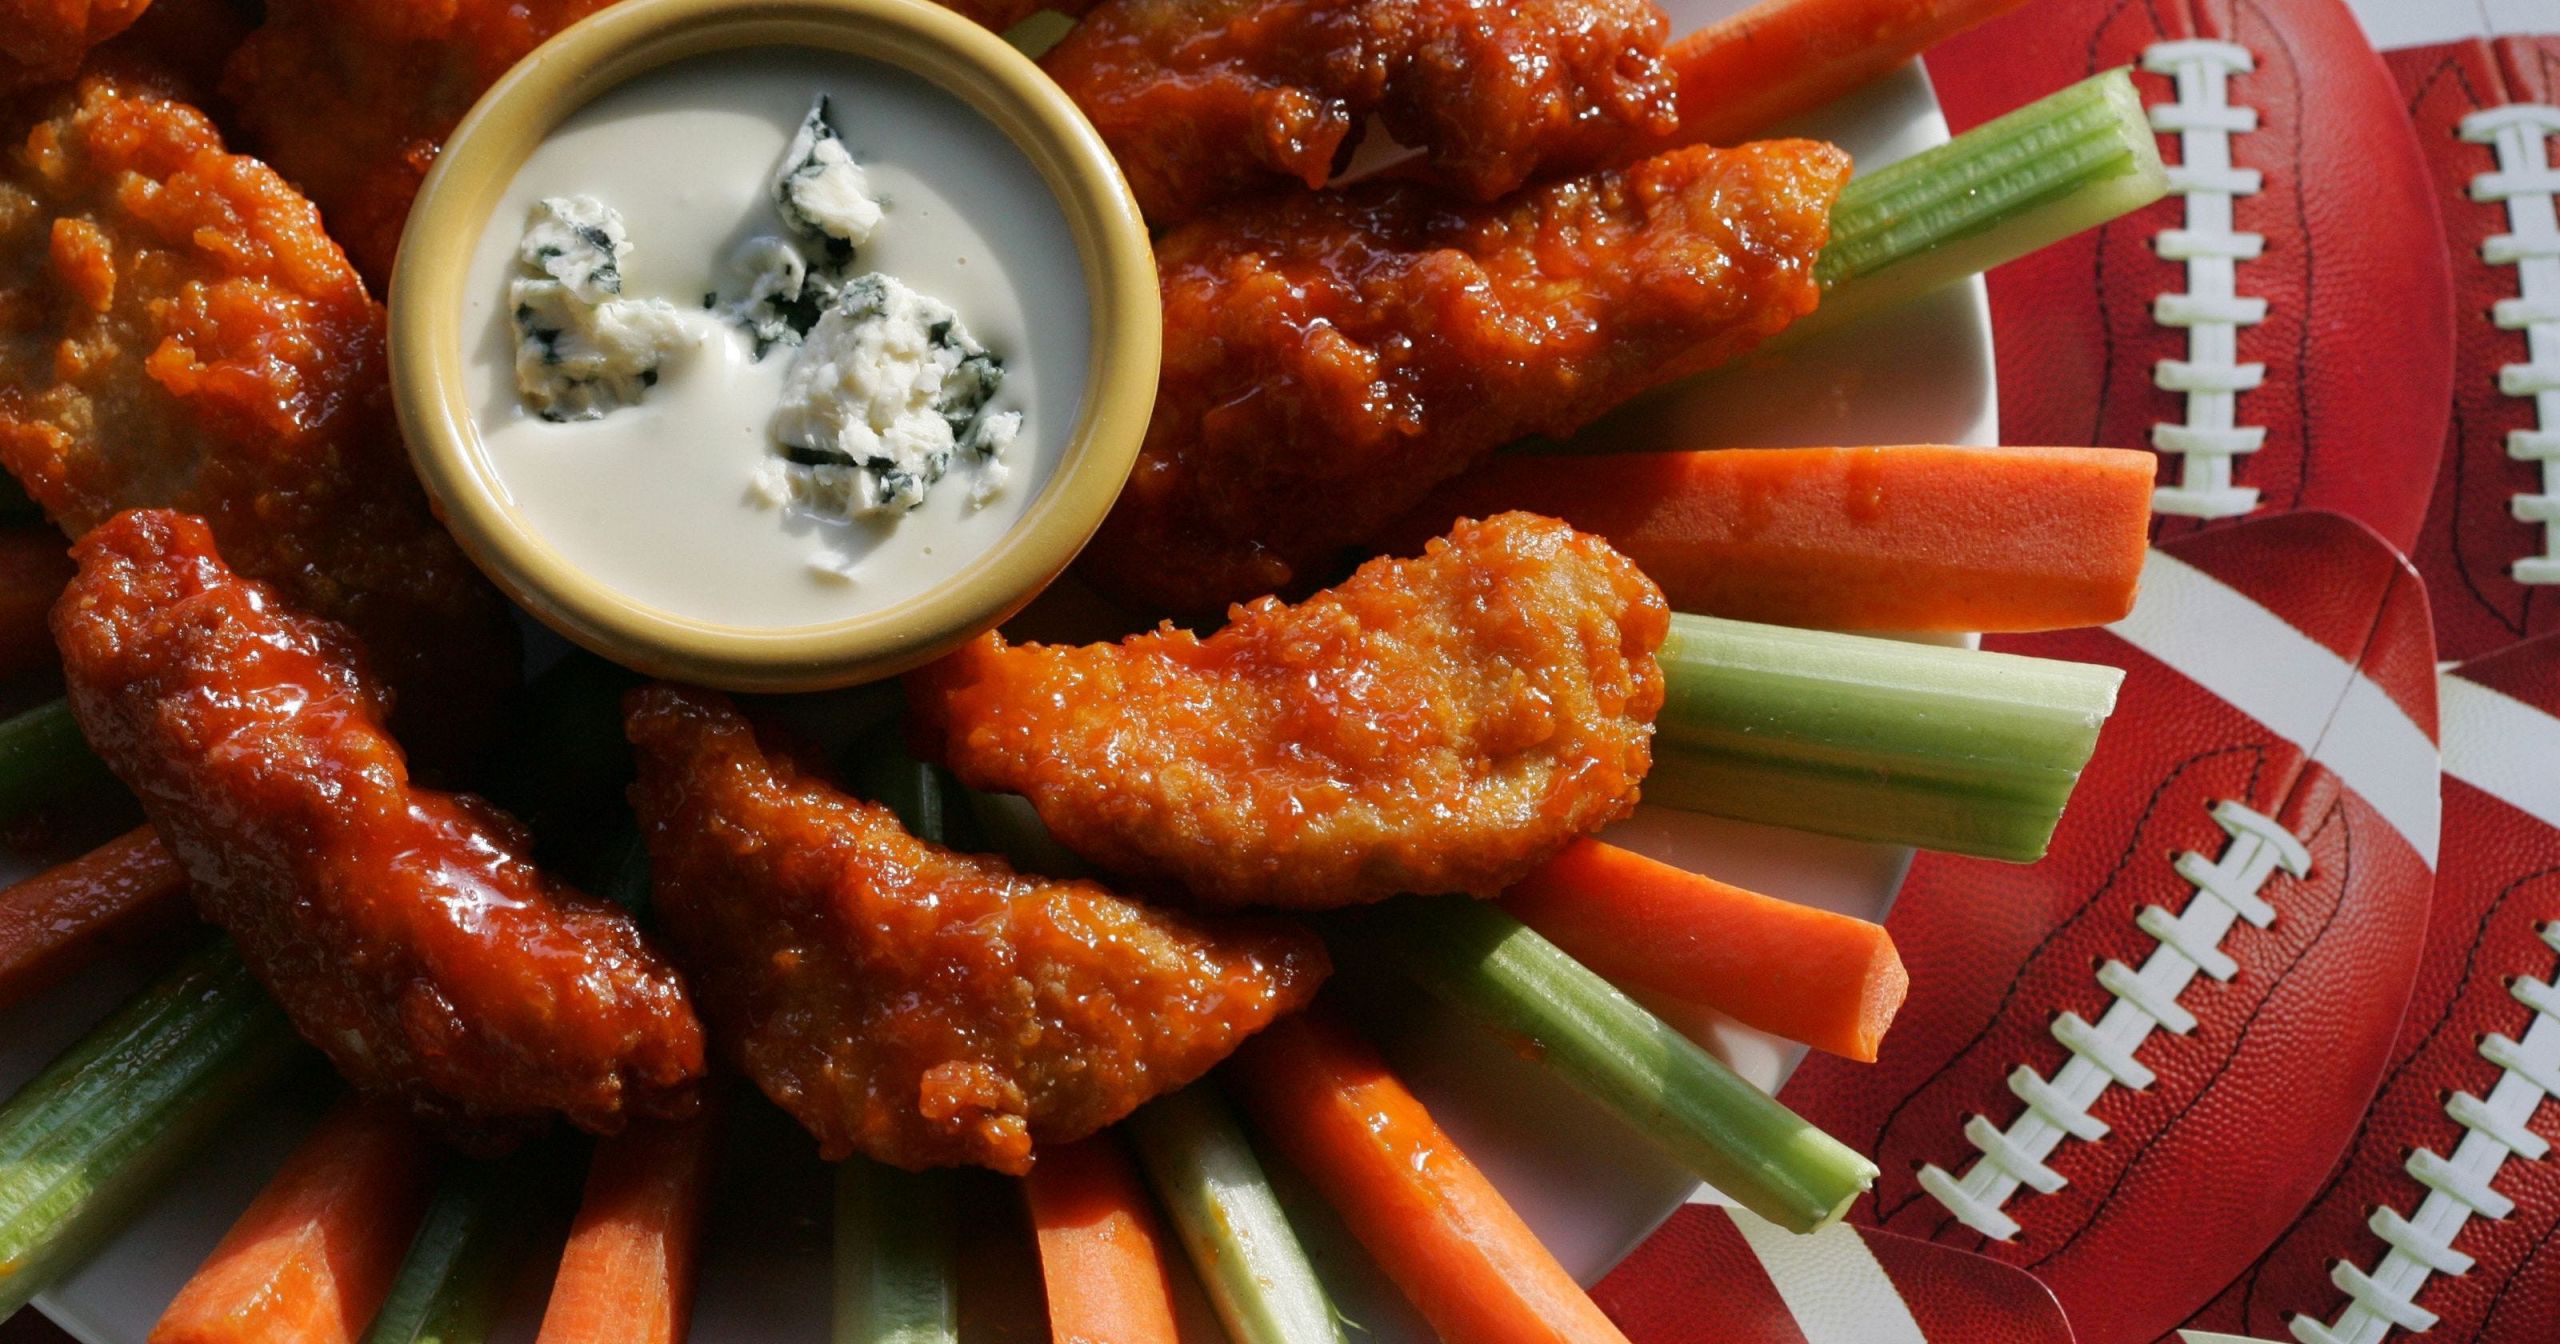 Super Bowl Chicken Wings Recipes
 3 chicken wing recipes your Super Bowl guests will love